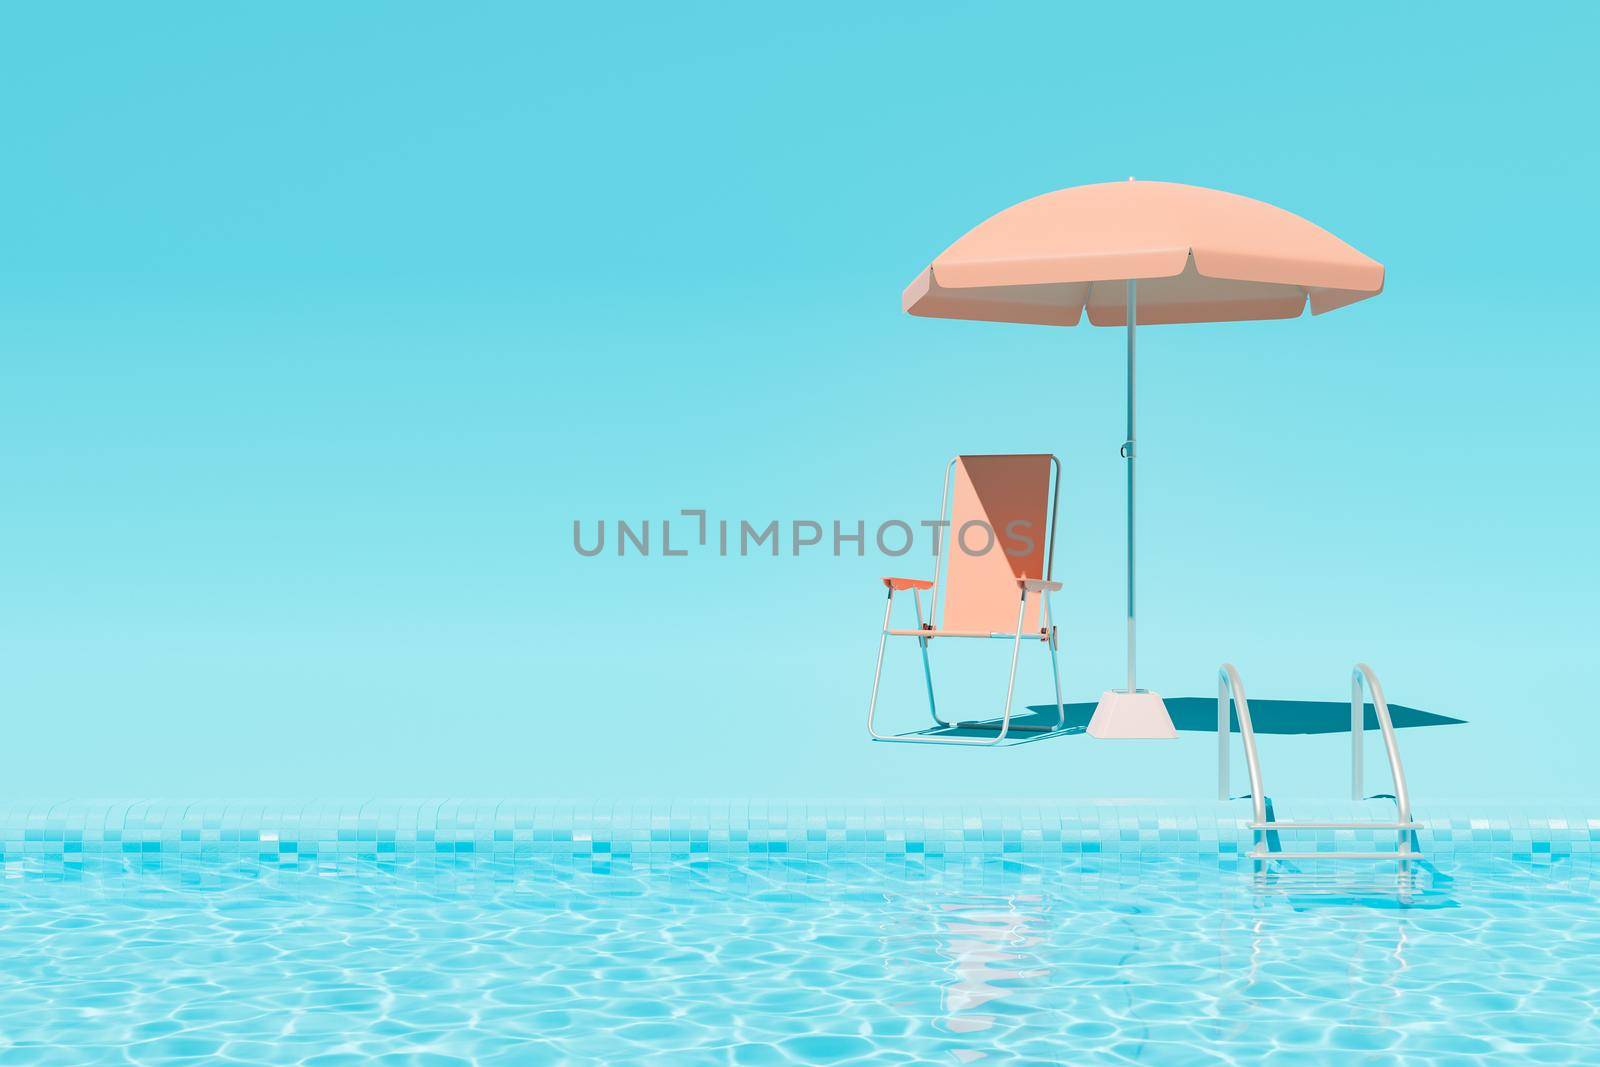 3D illustration of peach deckchair and umbrella located on turquoise poolside near ladder and clean water on summer weekend day